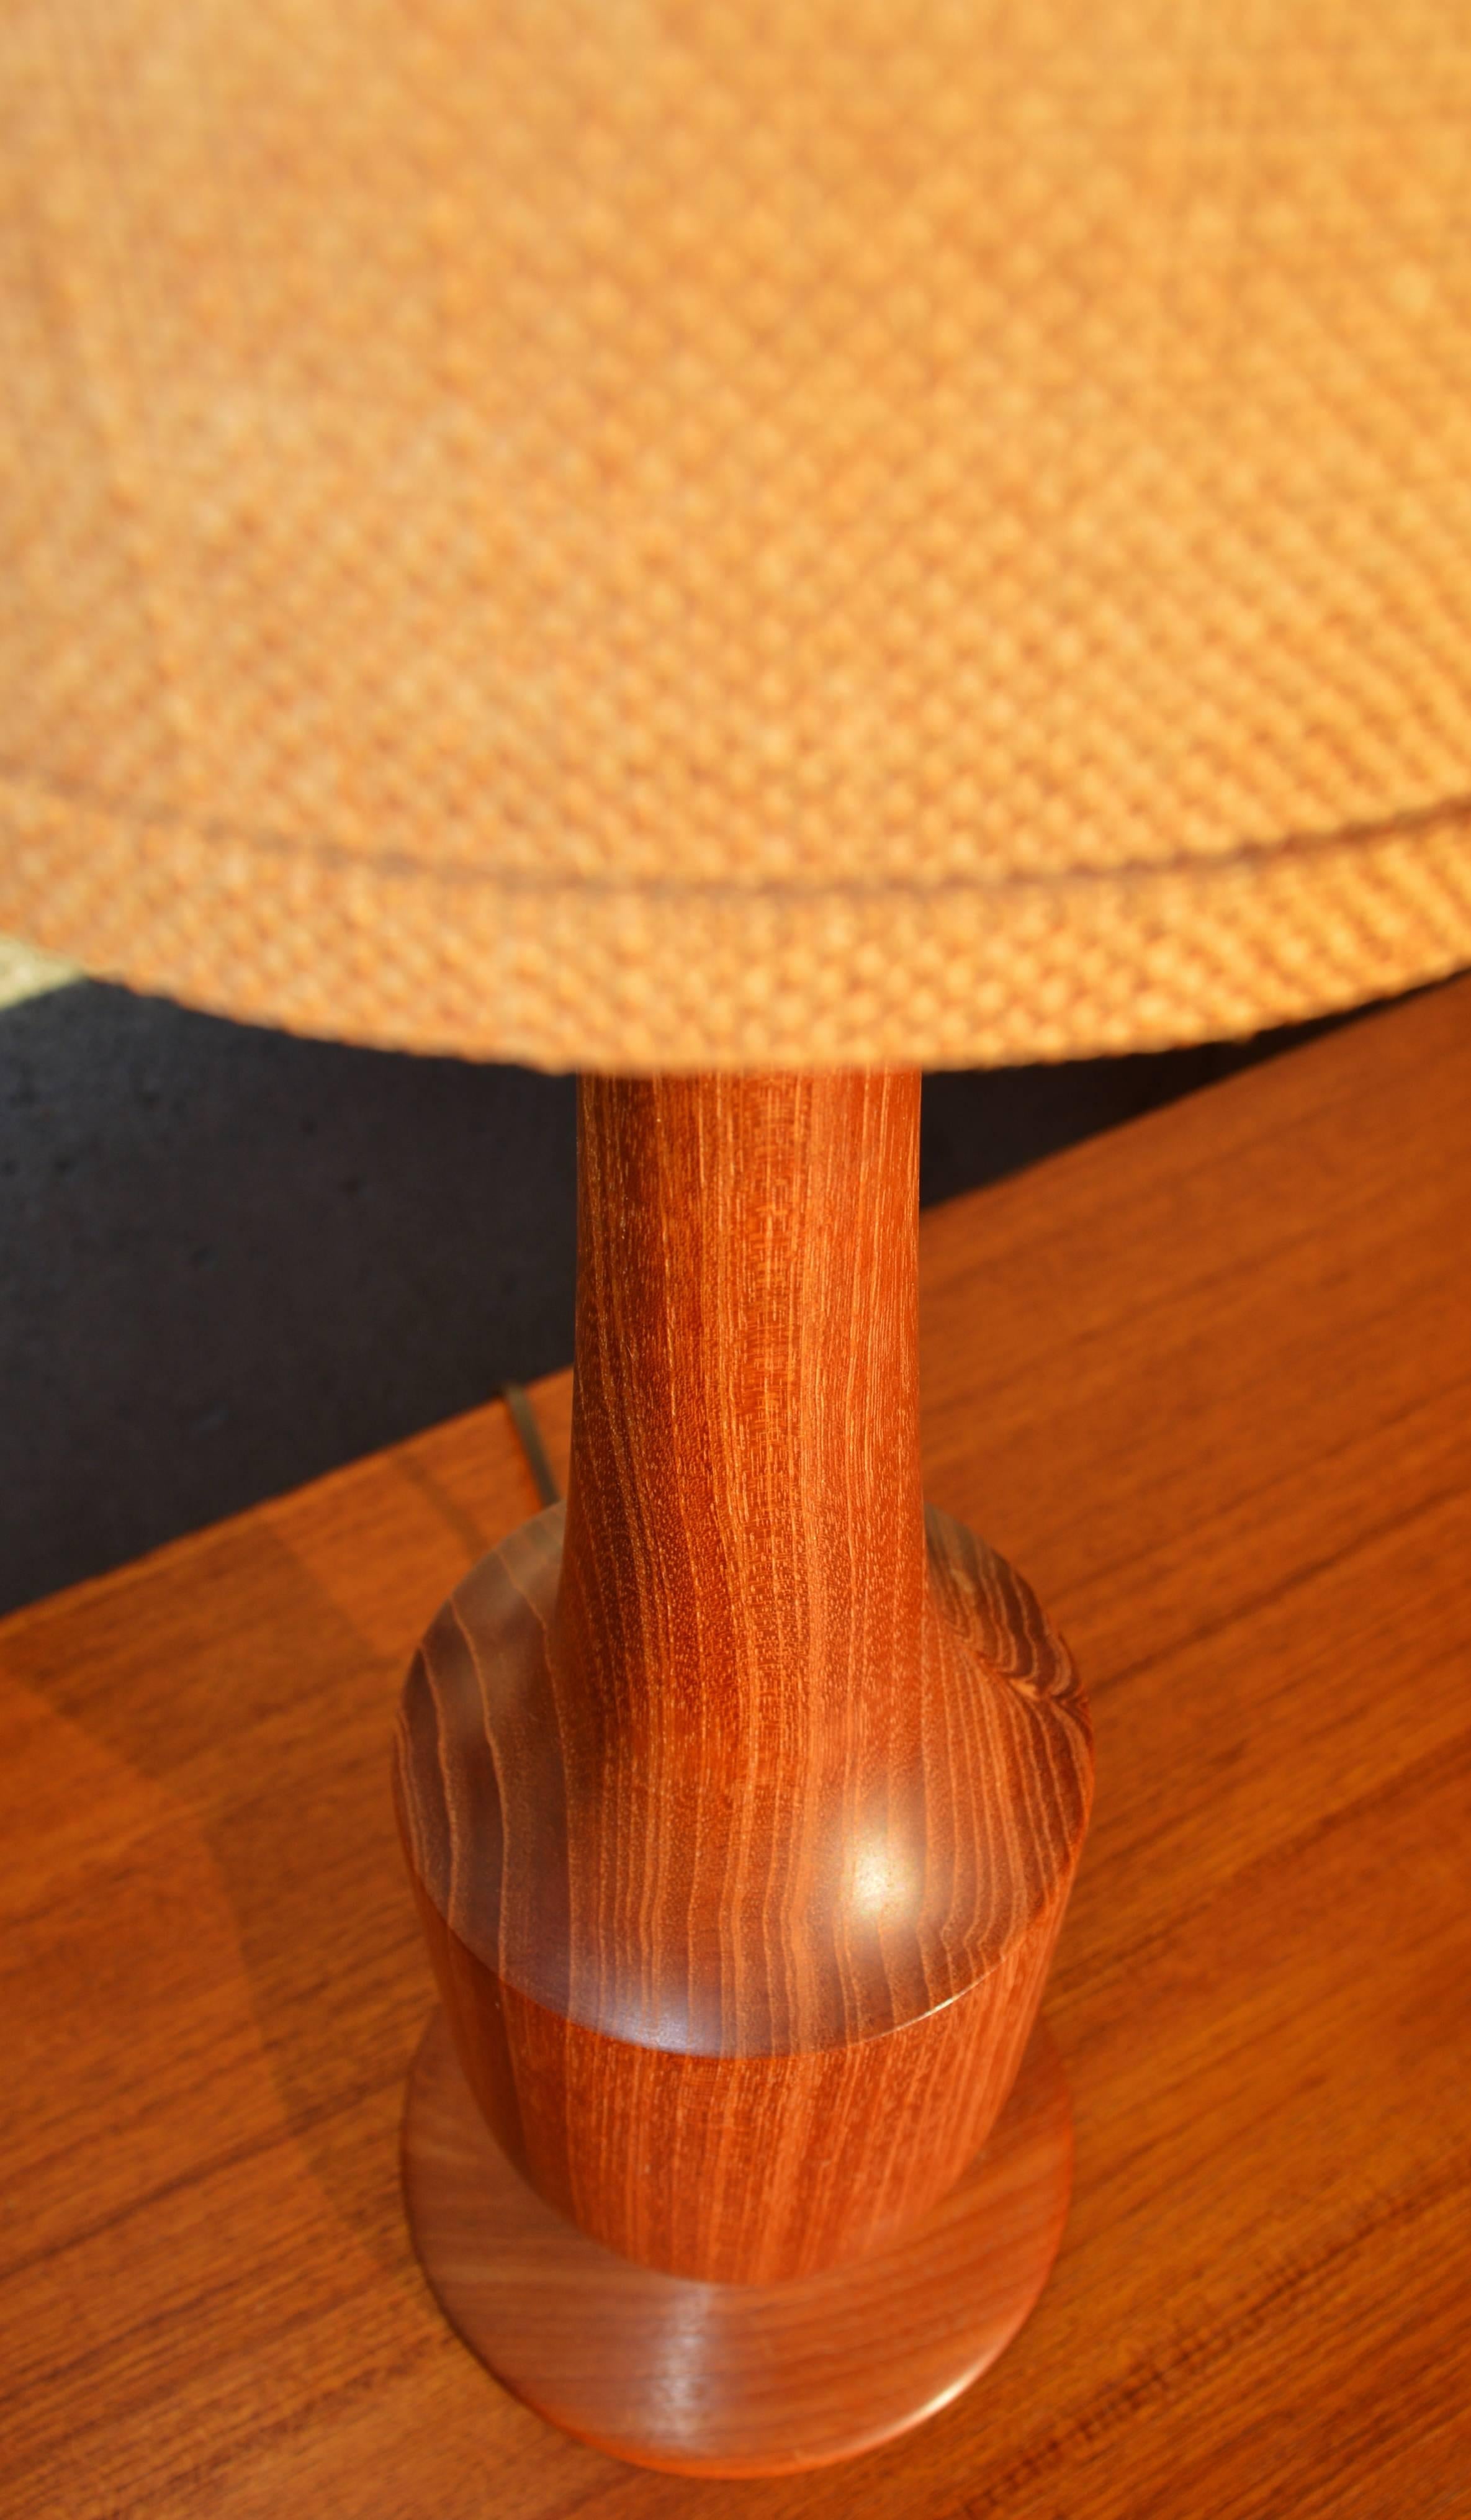 Mid-20th Century Solid Teak Sculptural Tall Lamp with Jute Cylinder Shade